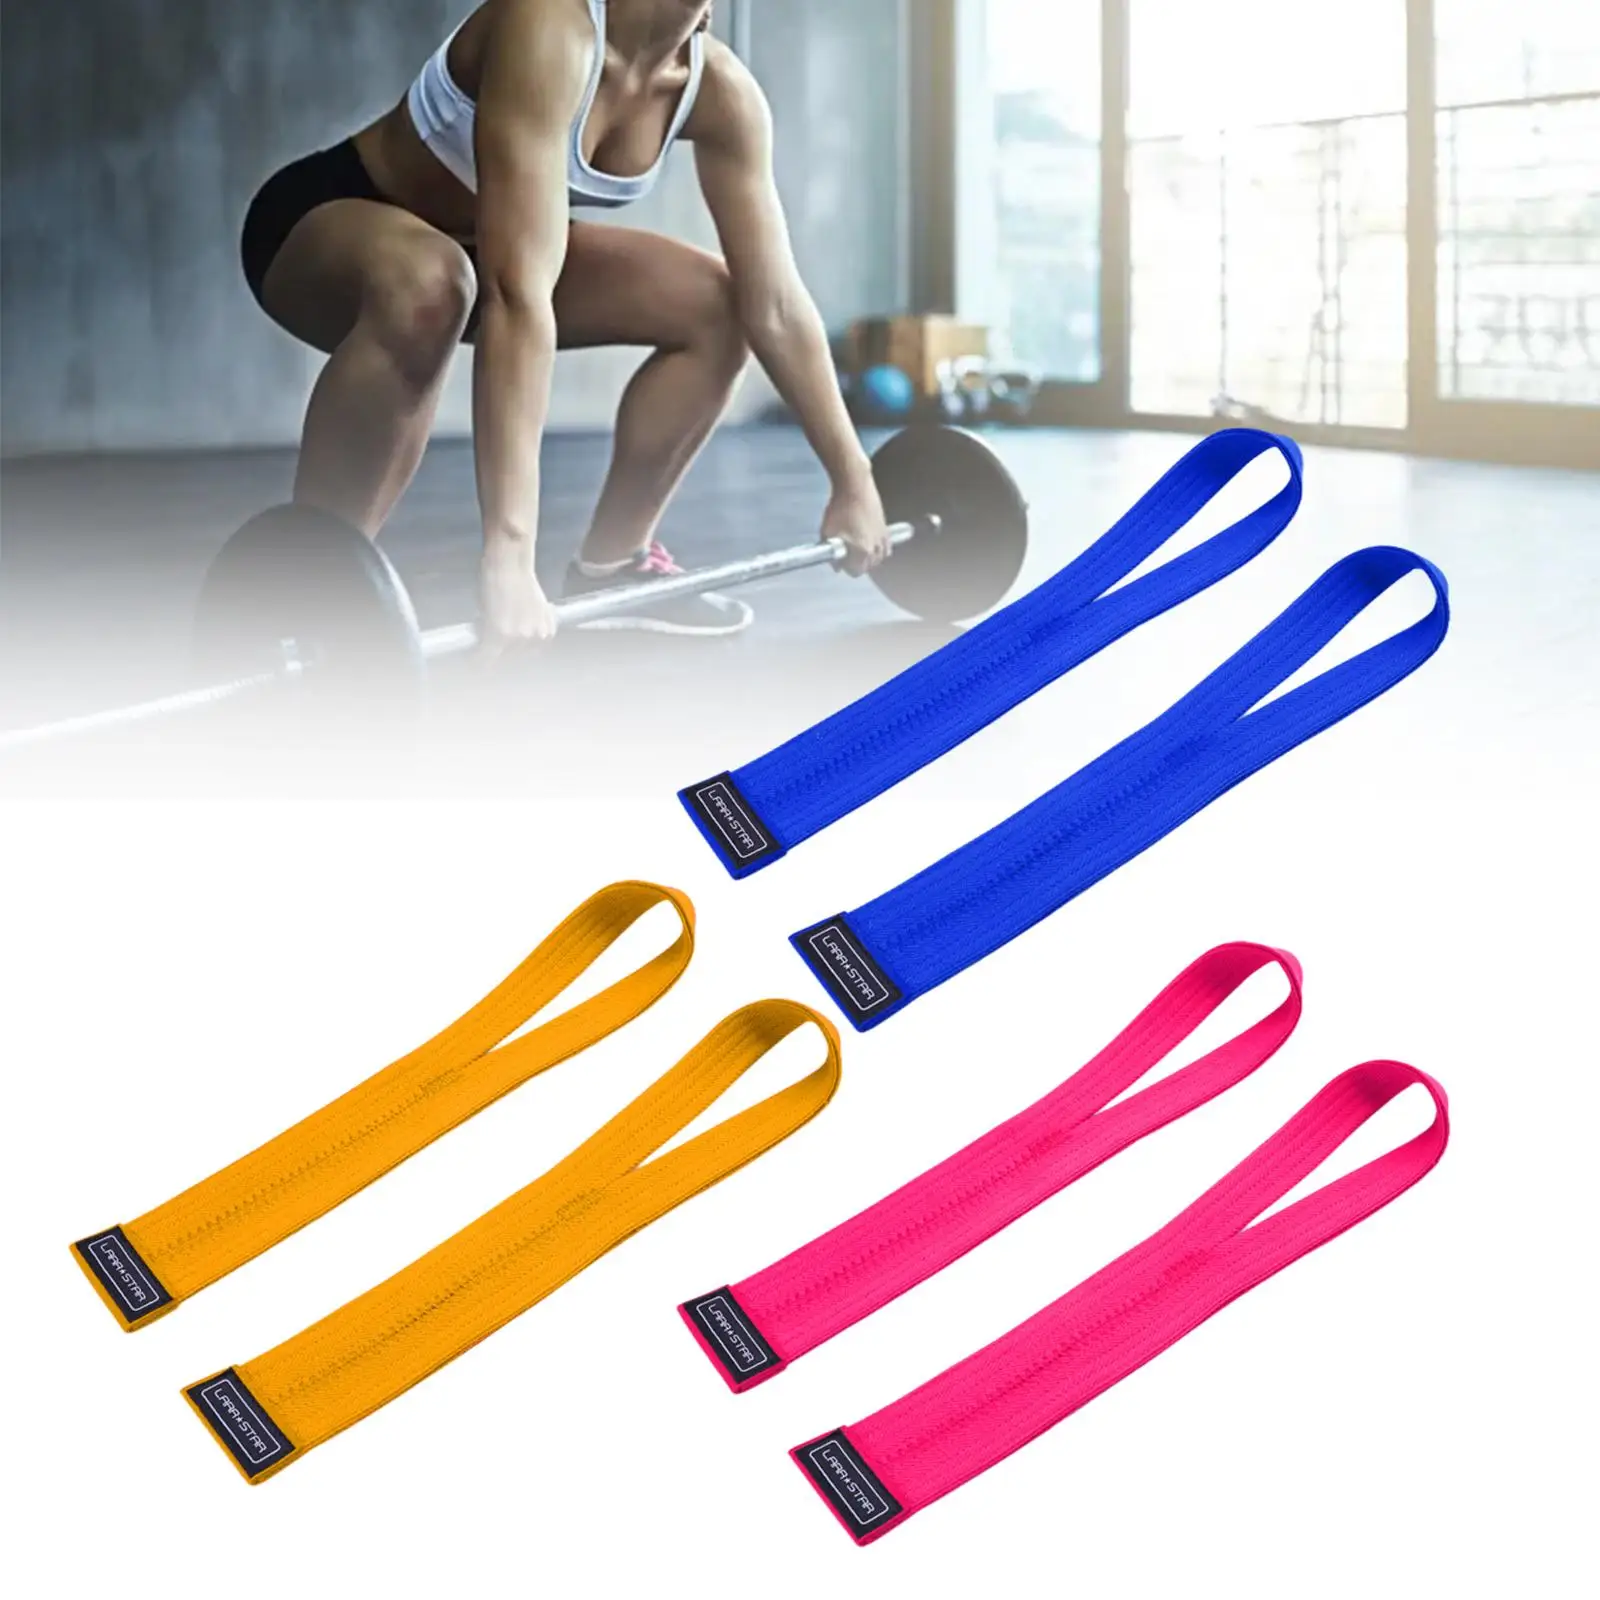 1 Pair Weight Lifting Straps Deadlift Straps Hand Grip Wrist Support Wraps for Exercise Deadlifting Strength Training Pull up